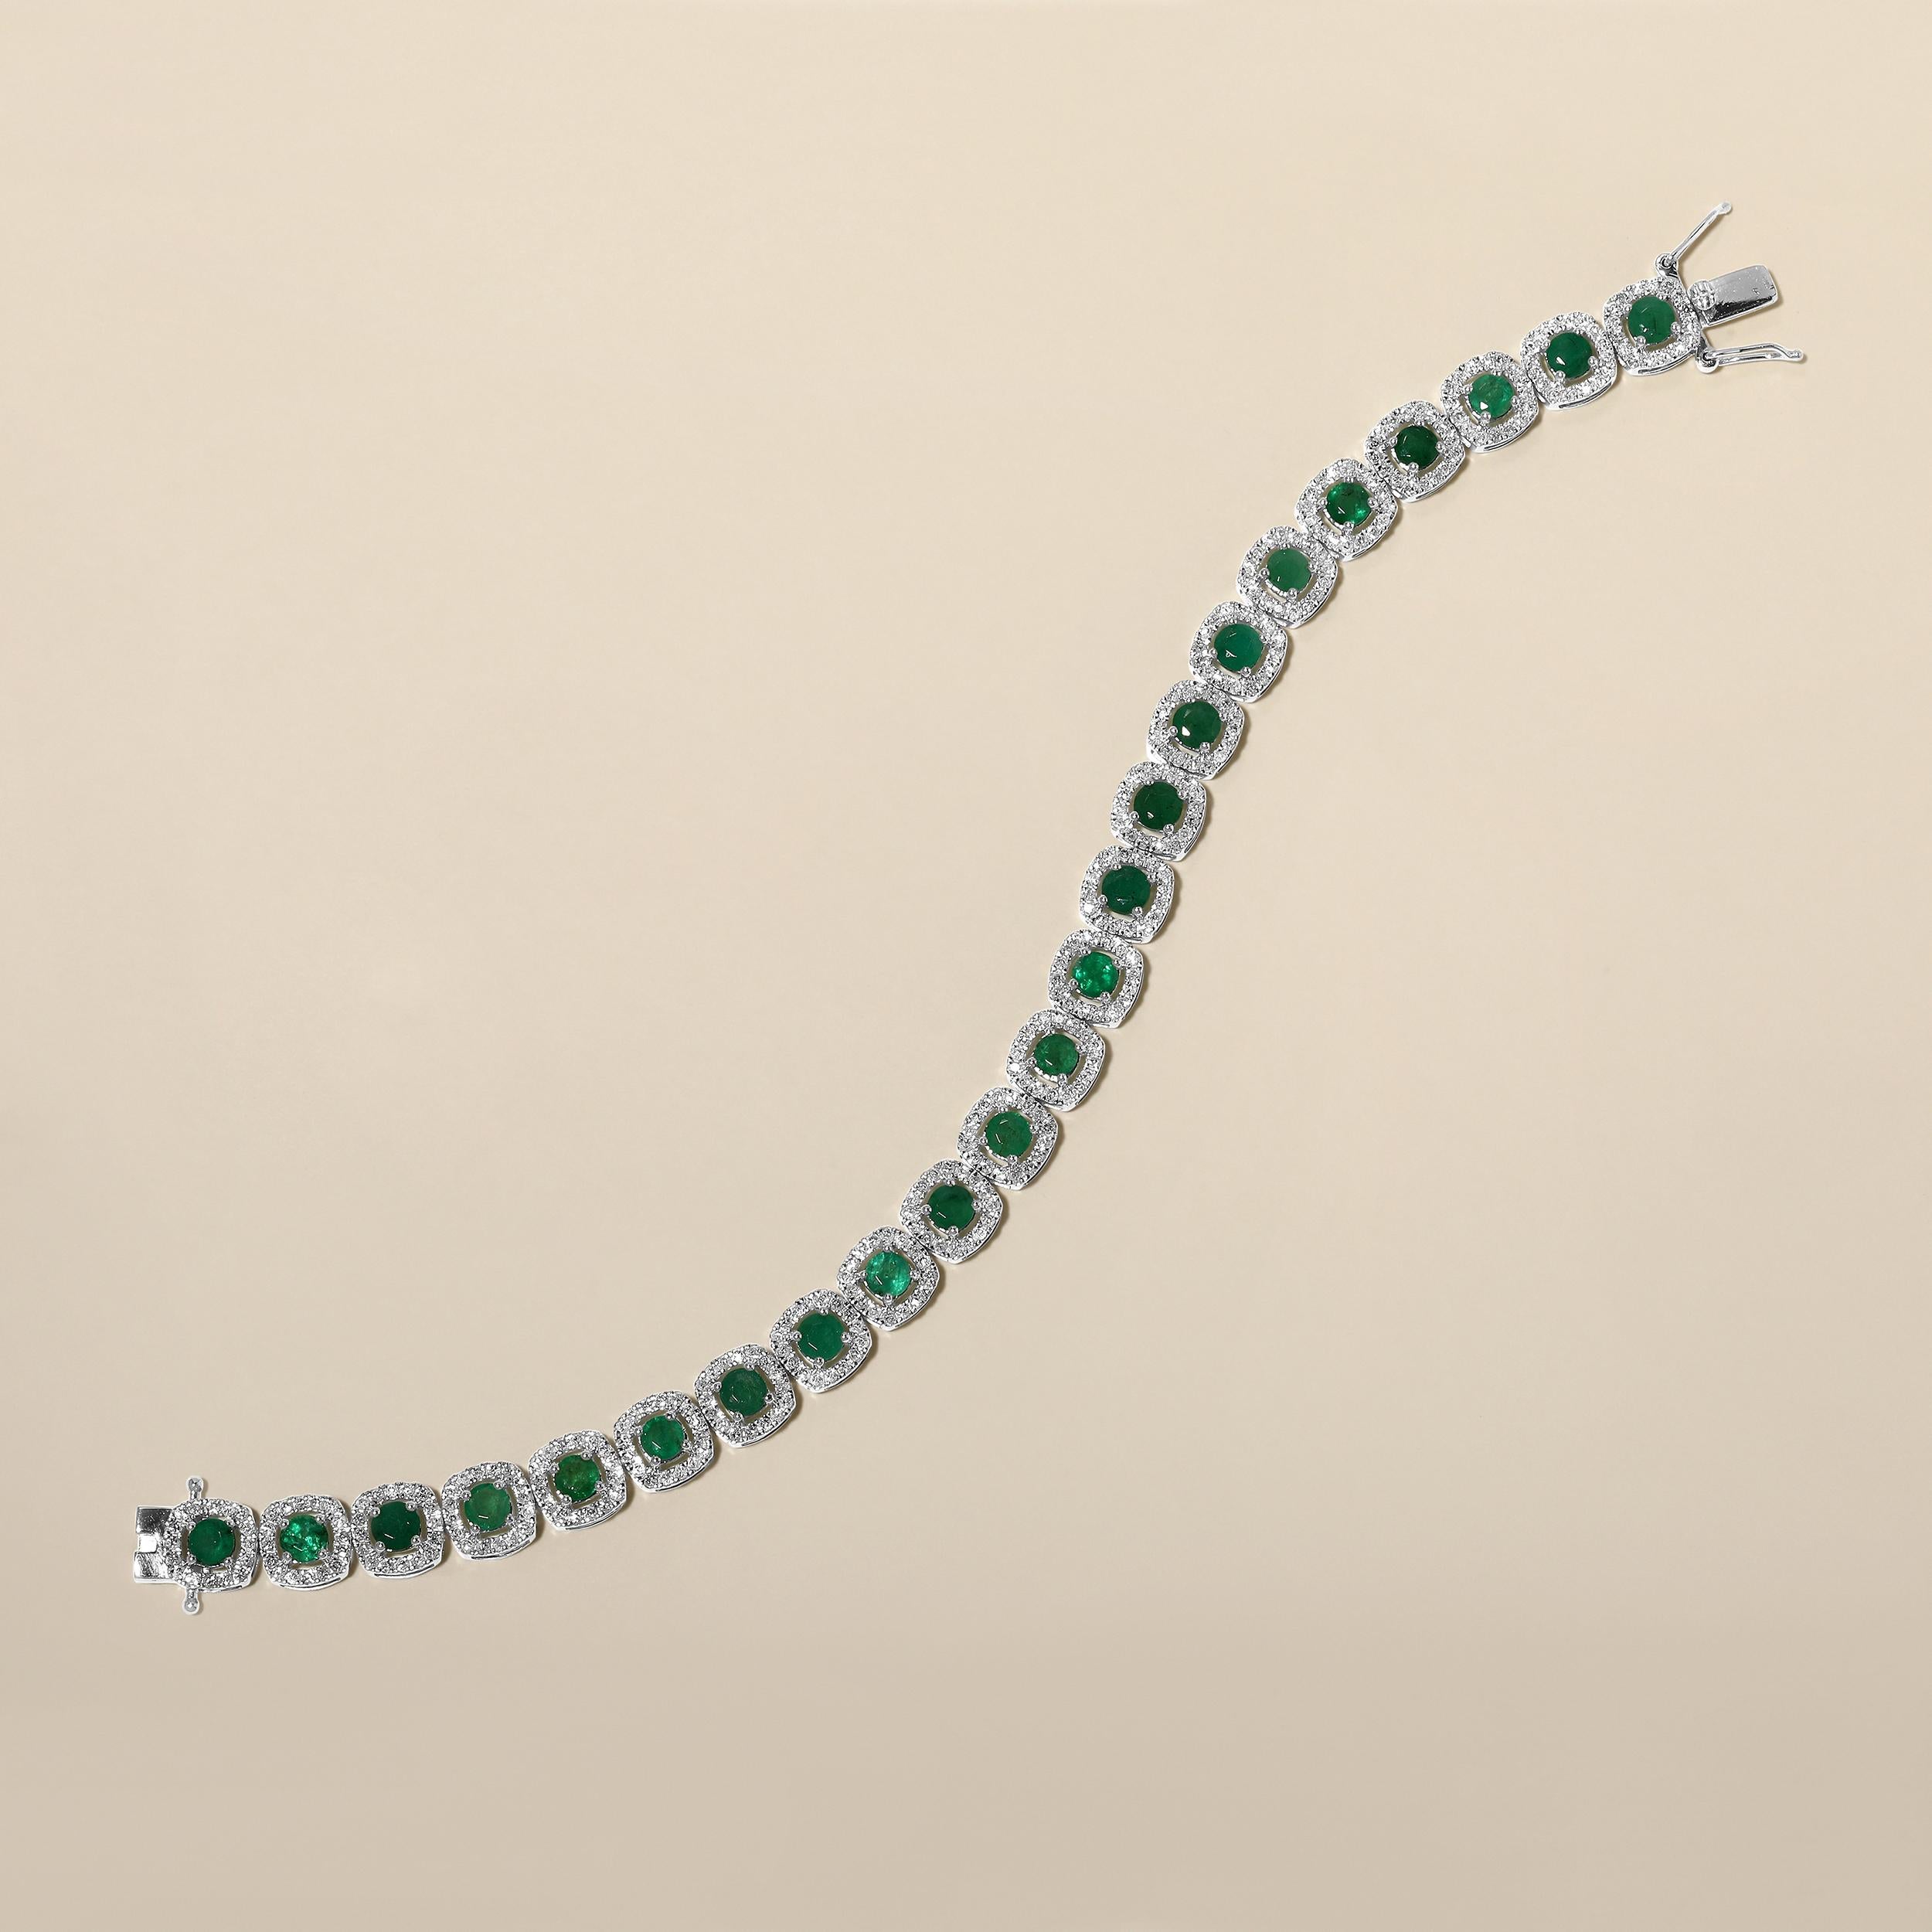 Crafted in 13.08 grams of 14K White Gold, the bracelet contains 368 stones of Round Natural Diamonds with a total of 2.58 carat in F-G color and I1-I2 clarity combined with 23 stones of Round Shaped Natural Emerald Gemstones with a total of 5.09